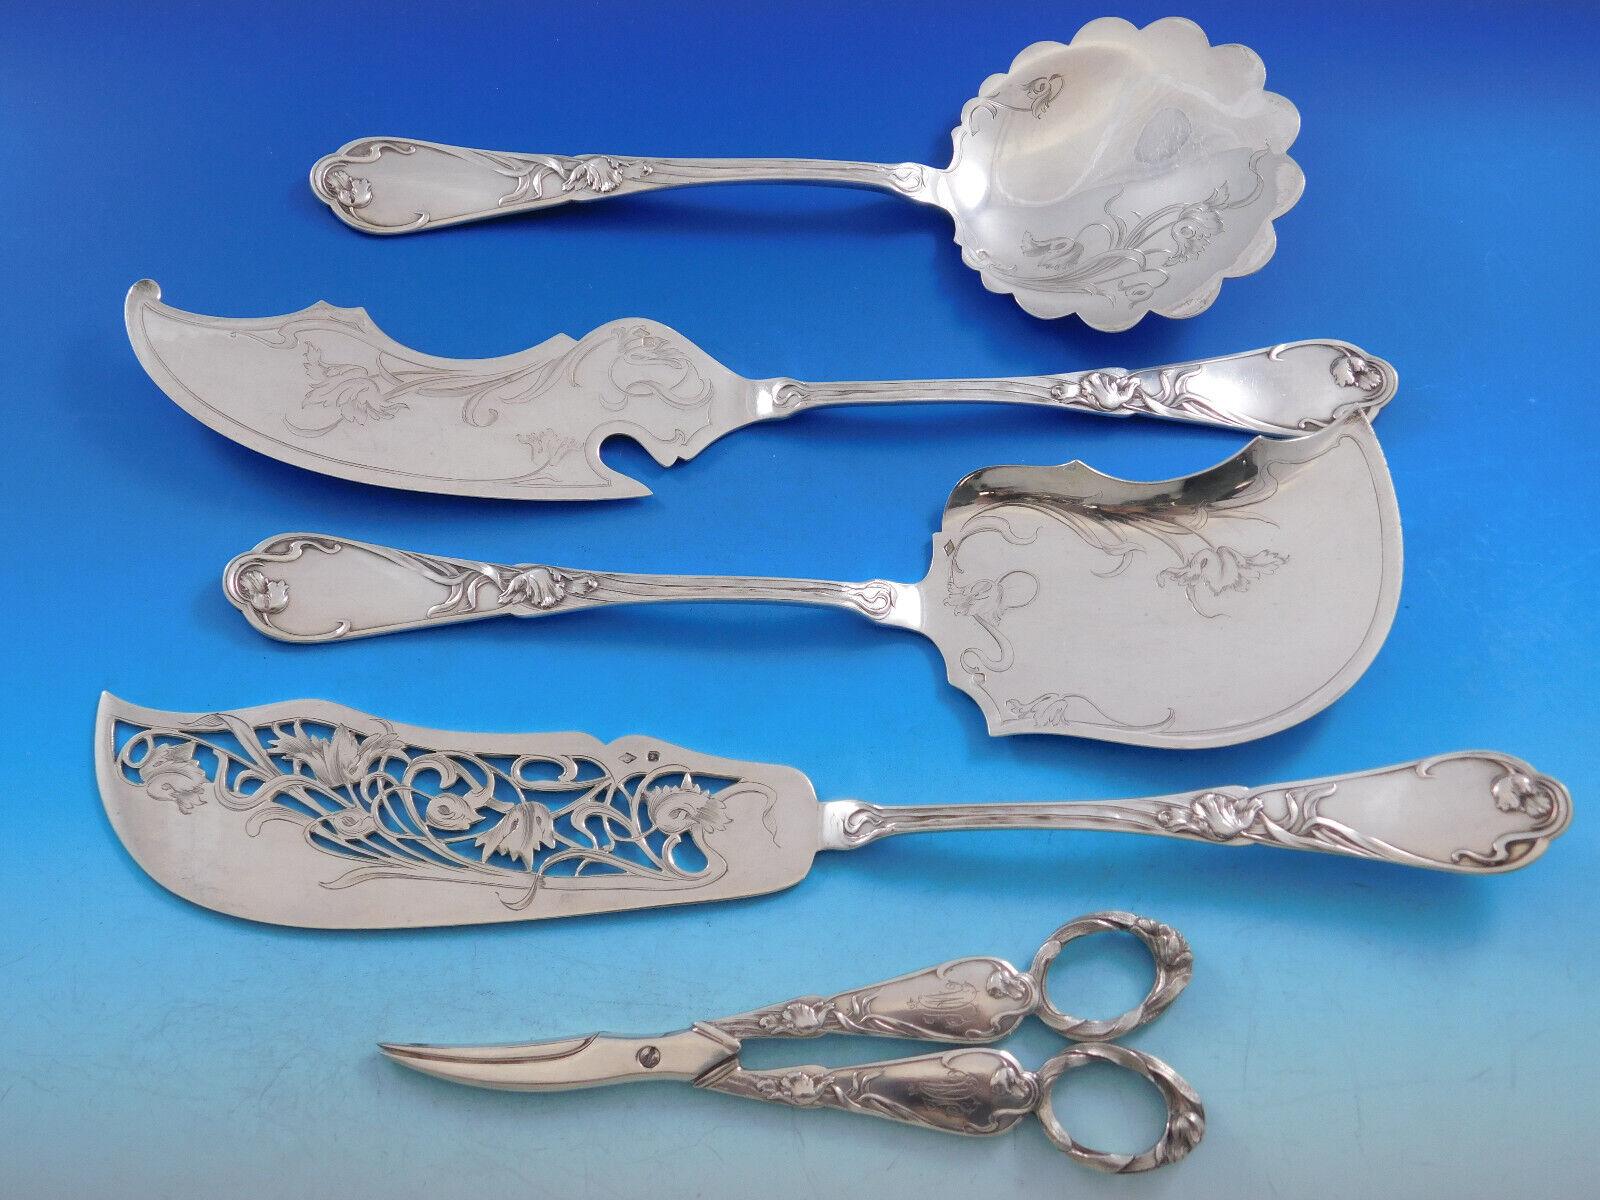 20th Century Tulipe Tulip by Boulenger French 950 Sterling Silver Flatware Service Set 214 pc For Sale